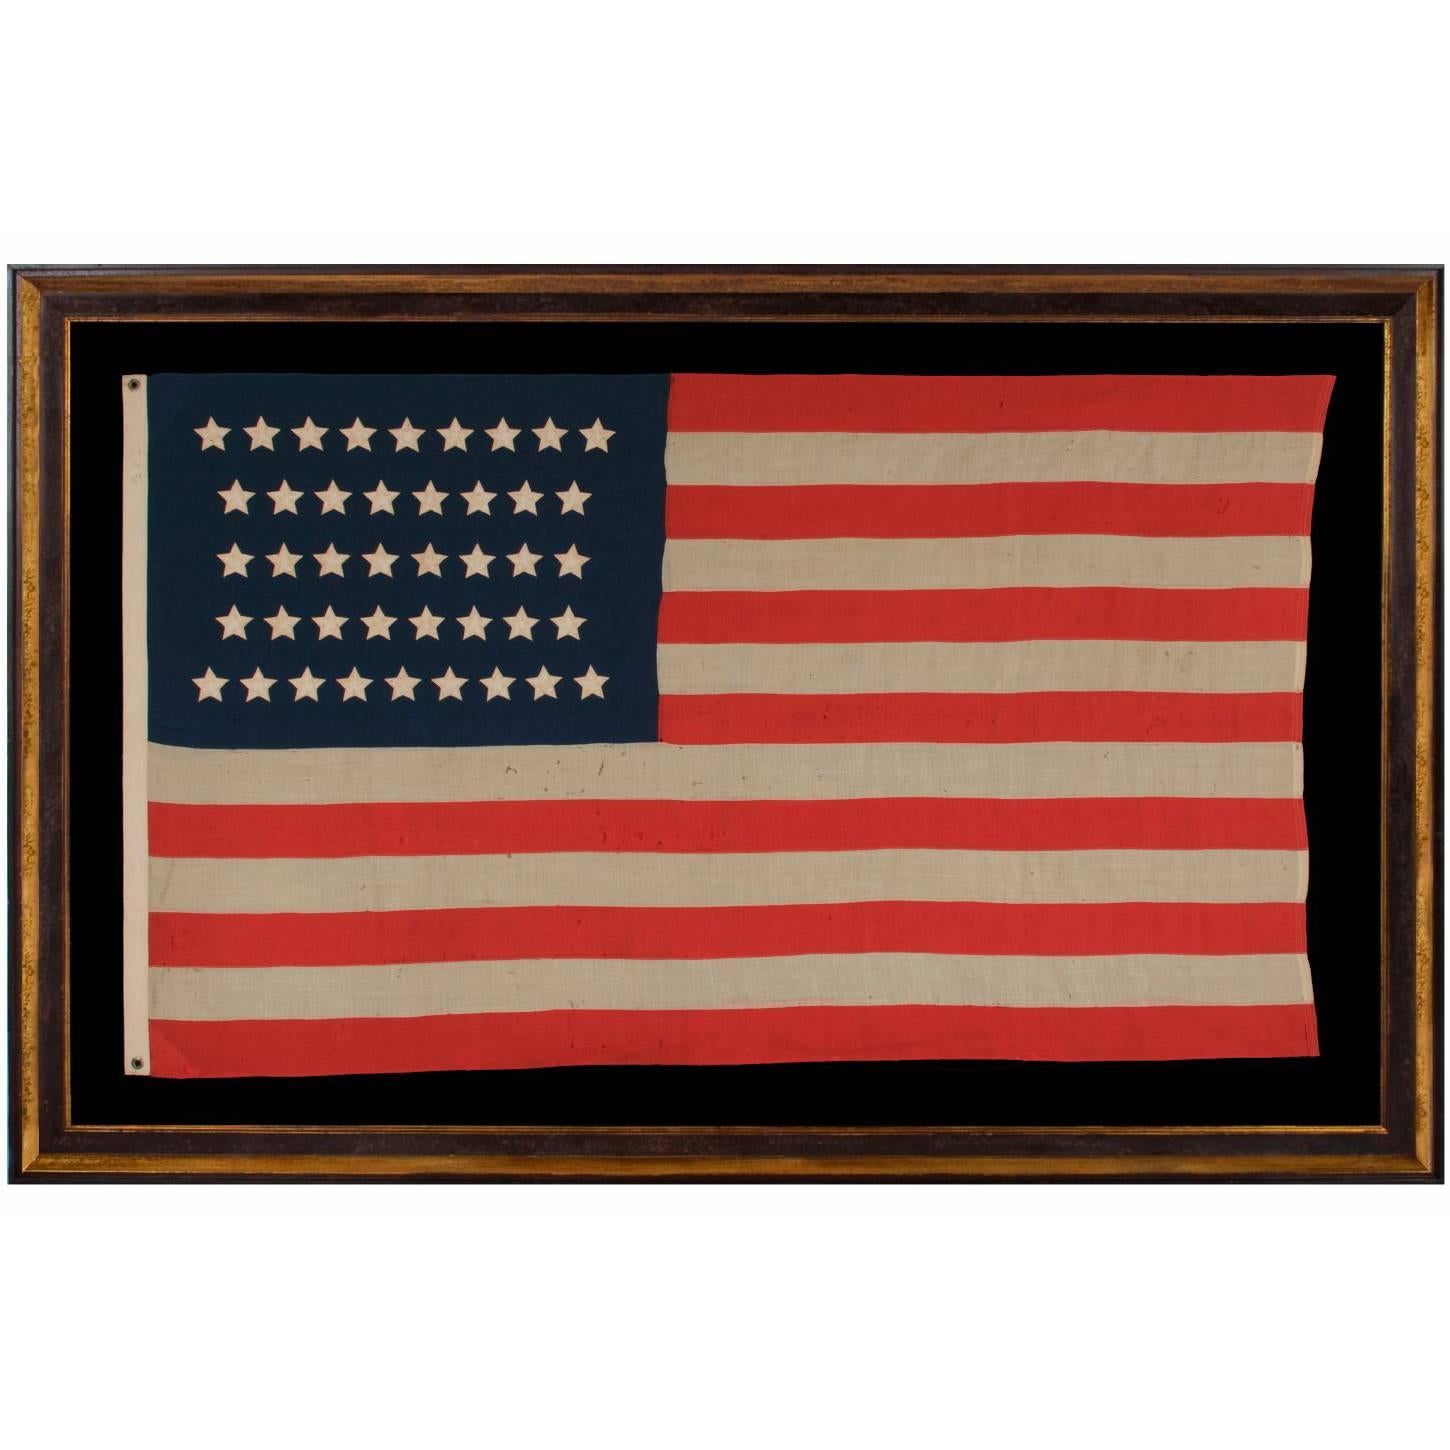 42 Stars in an Hourglass Pattern on an Antique American Flag